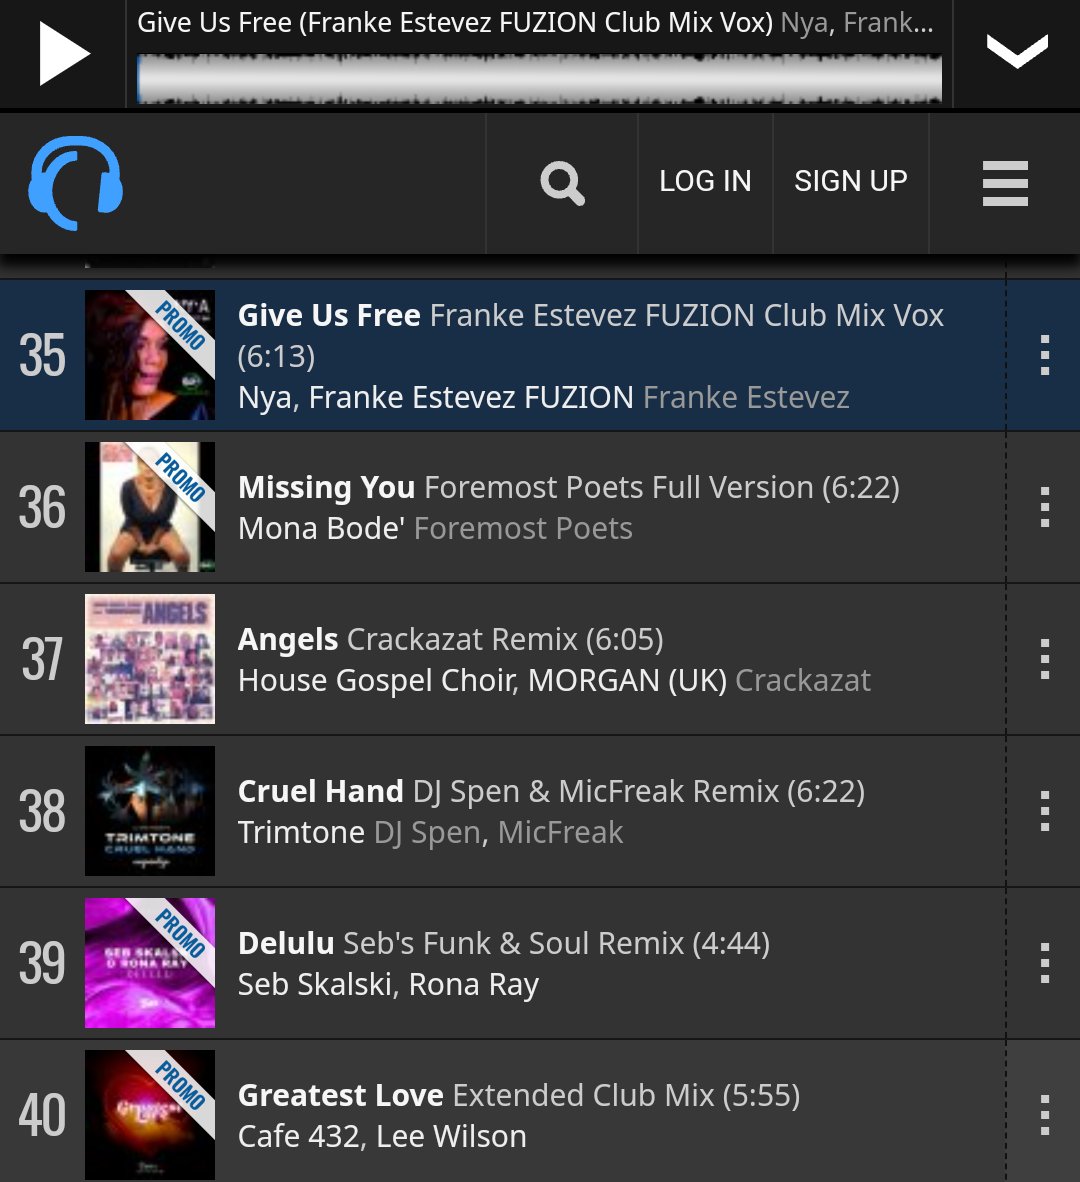 Ny'a Give Us Free Franke Estevez Fuzion Remixes is climbing up the Top 100 Soulful House Charts on Traxsource. It's currently at #35! Let's Gooooo! 
Nap Vision Entertainment, LLC. Cyberjamz Records. #GiveUsFree 

traxsource.com/genre/24/soulf…